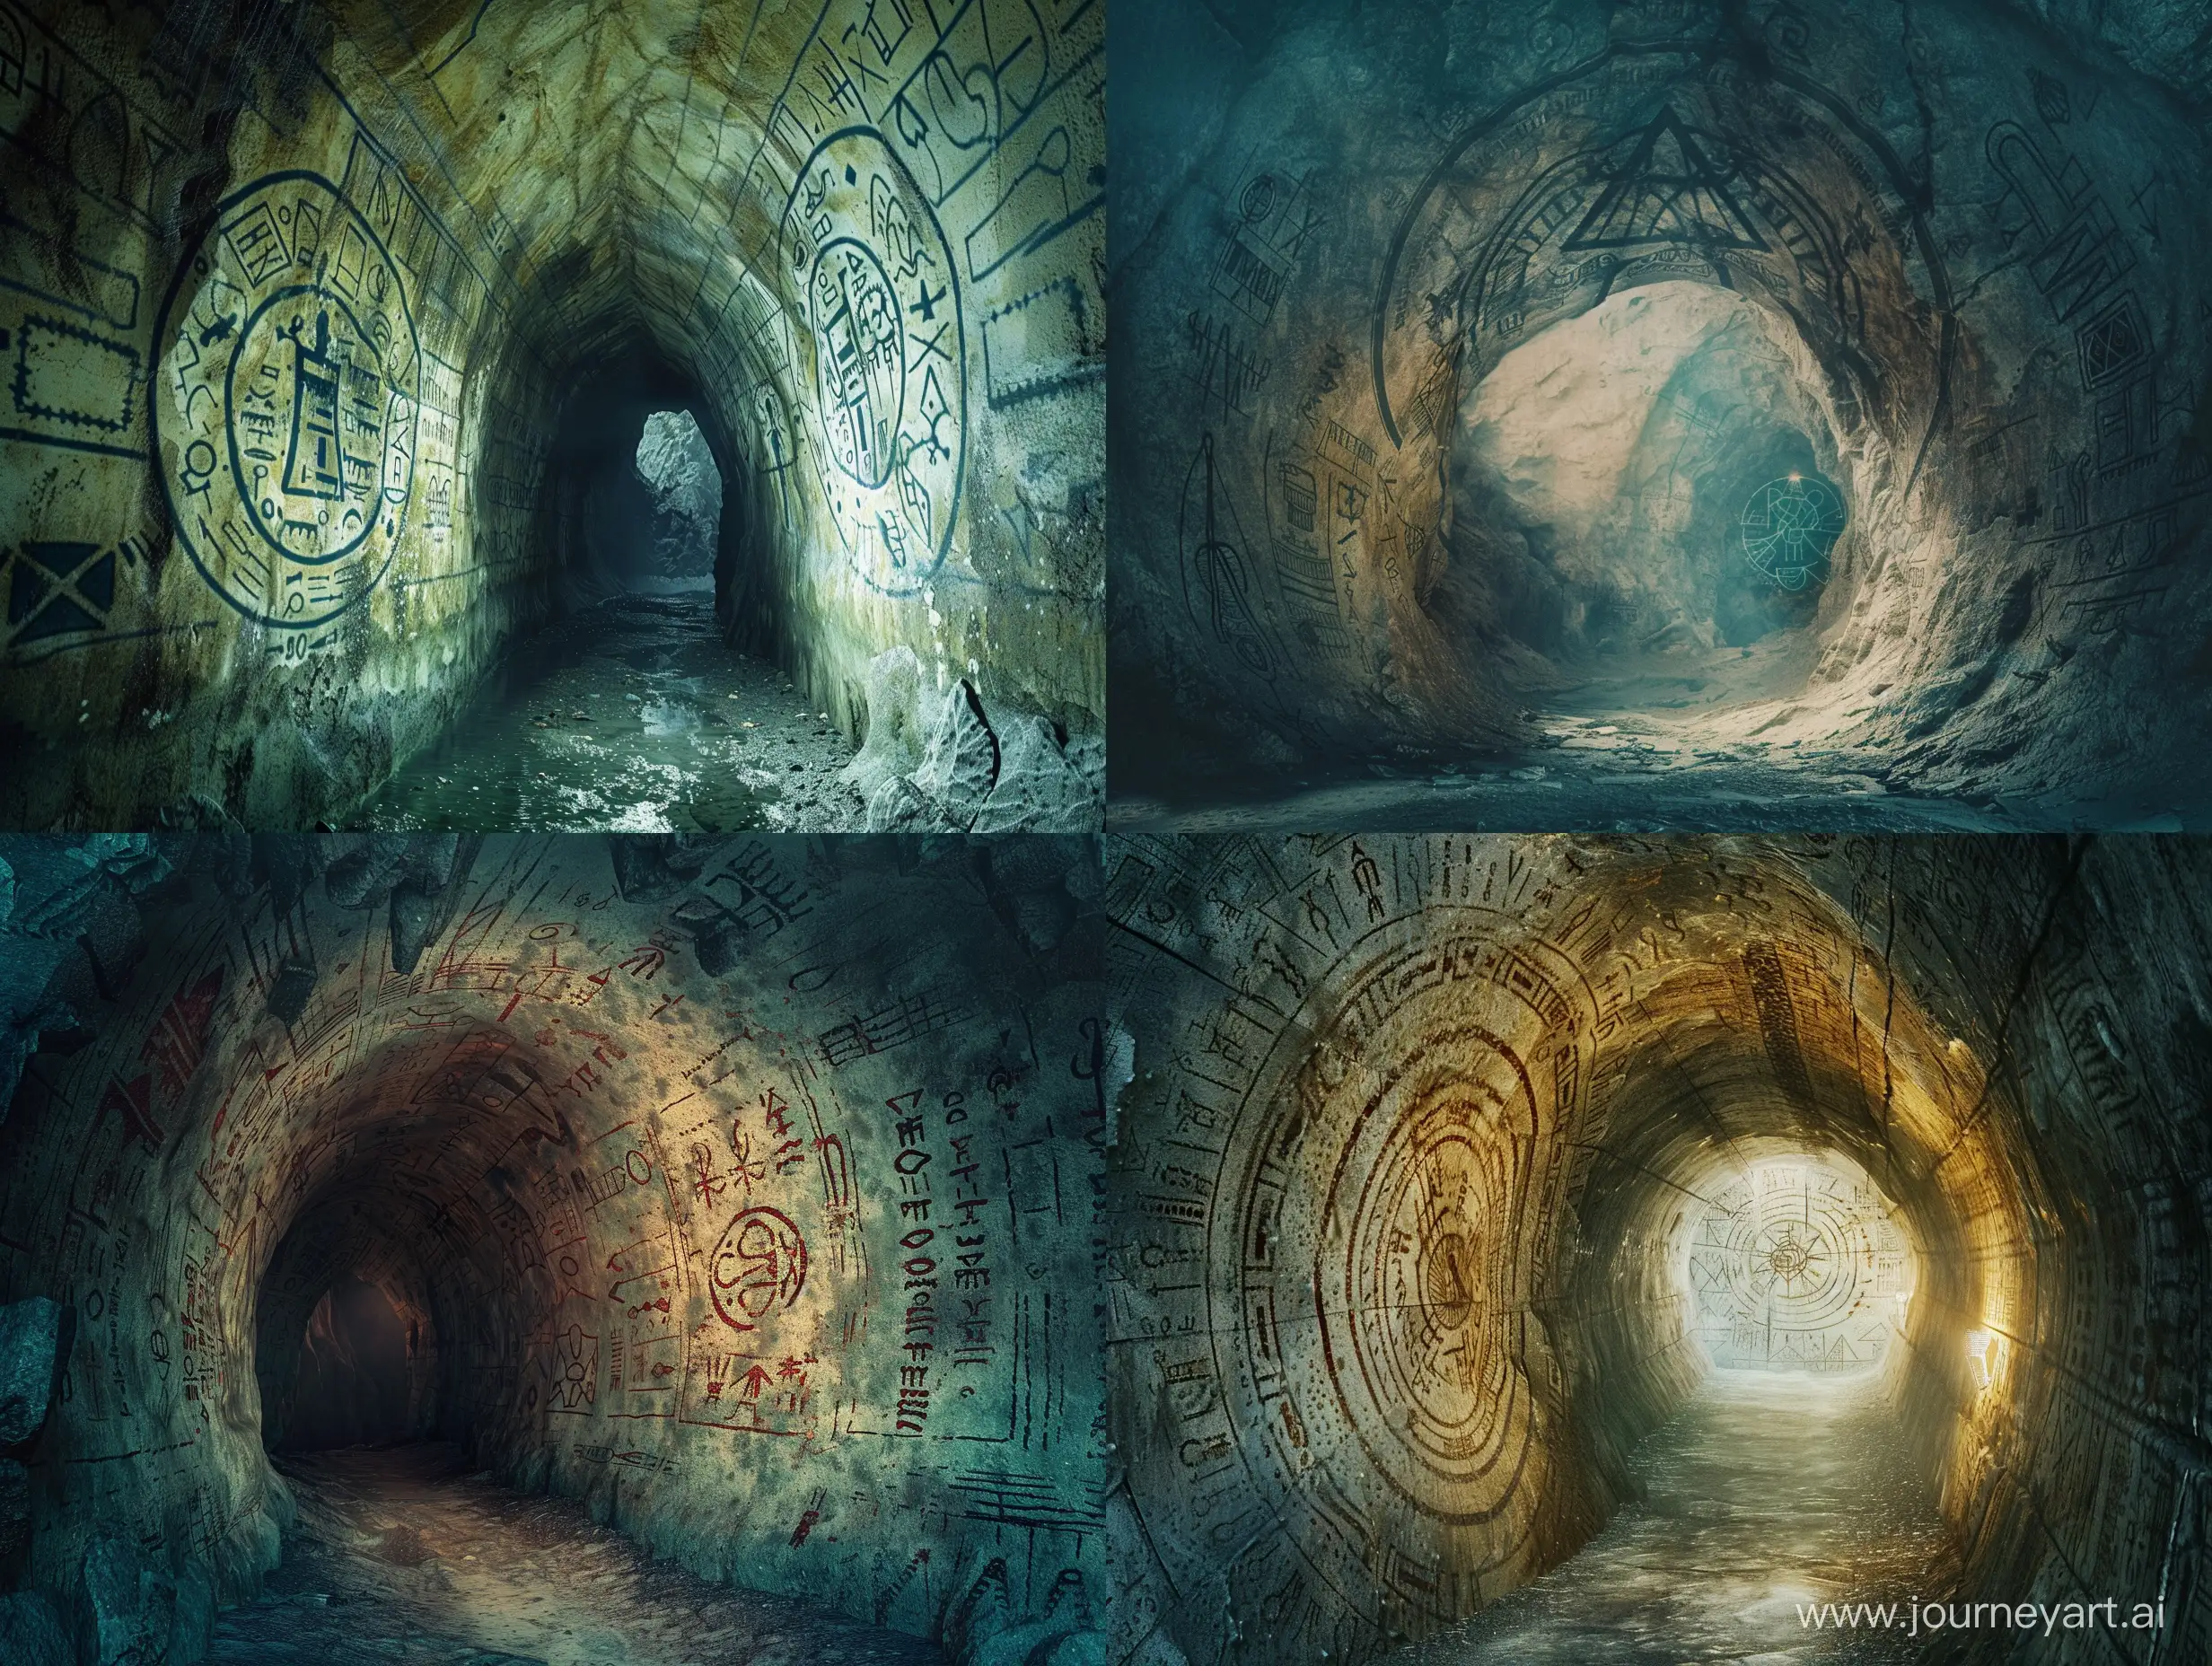 8k, Before you is a mysterious tunnel, created using ancient unknown technology, like a portal to the past. Its walls are decorated with mysterious drawings, symbols that evoke imagination and questions. The dark, mystical atmosphere of the tunnel makes you feel as if you have stepped into another dimension, where past and present merge in a marvelous dance of time. Like a key to ancient secrets, this tunnel invites us to explore its depths and unravel the mysteries hidden within its ancient walls